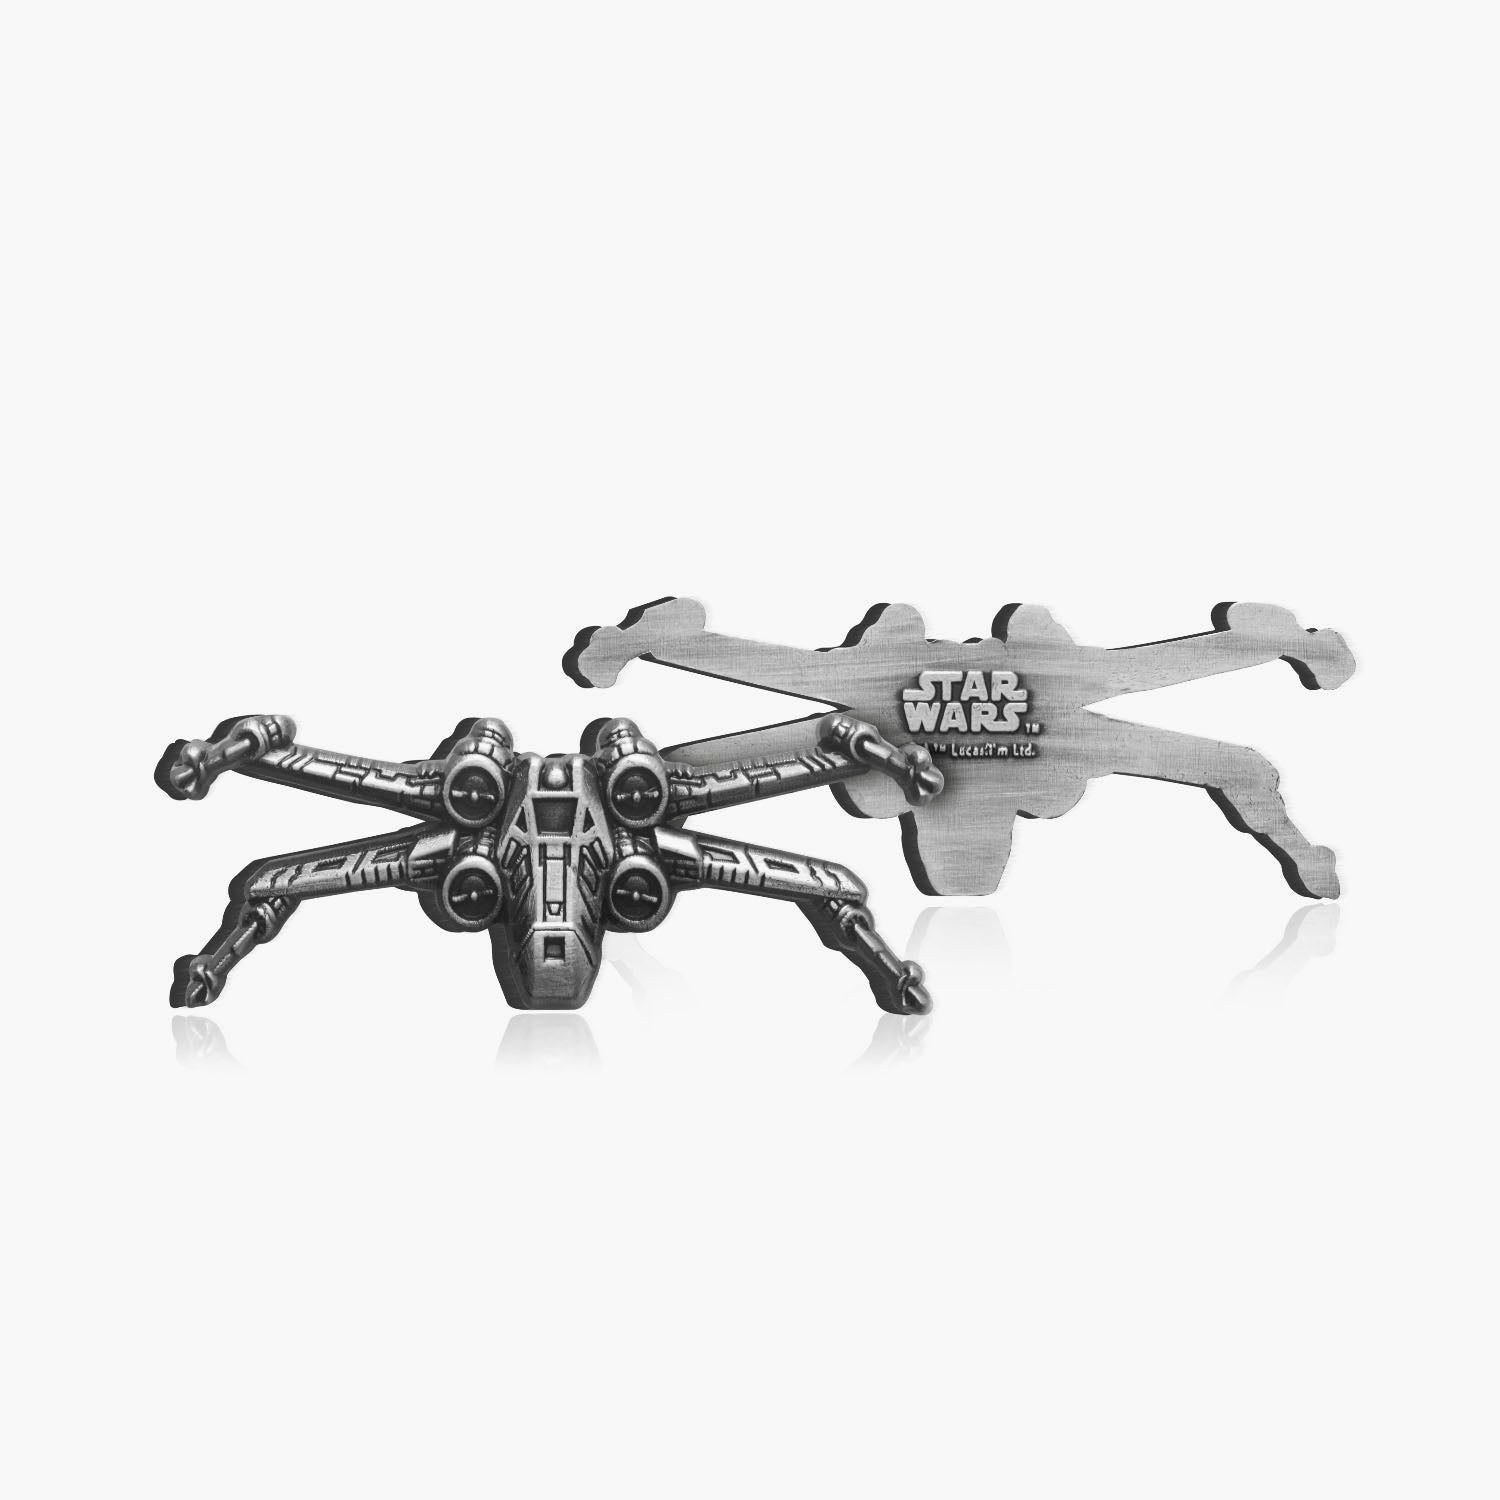 Official Star Wars X-Wing Shaped Commemorative